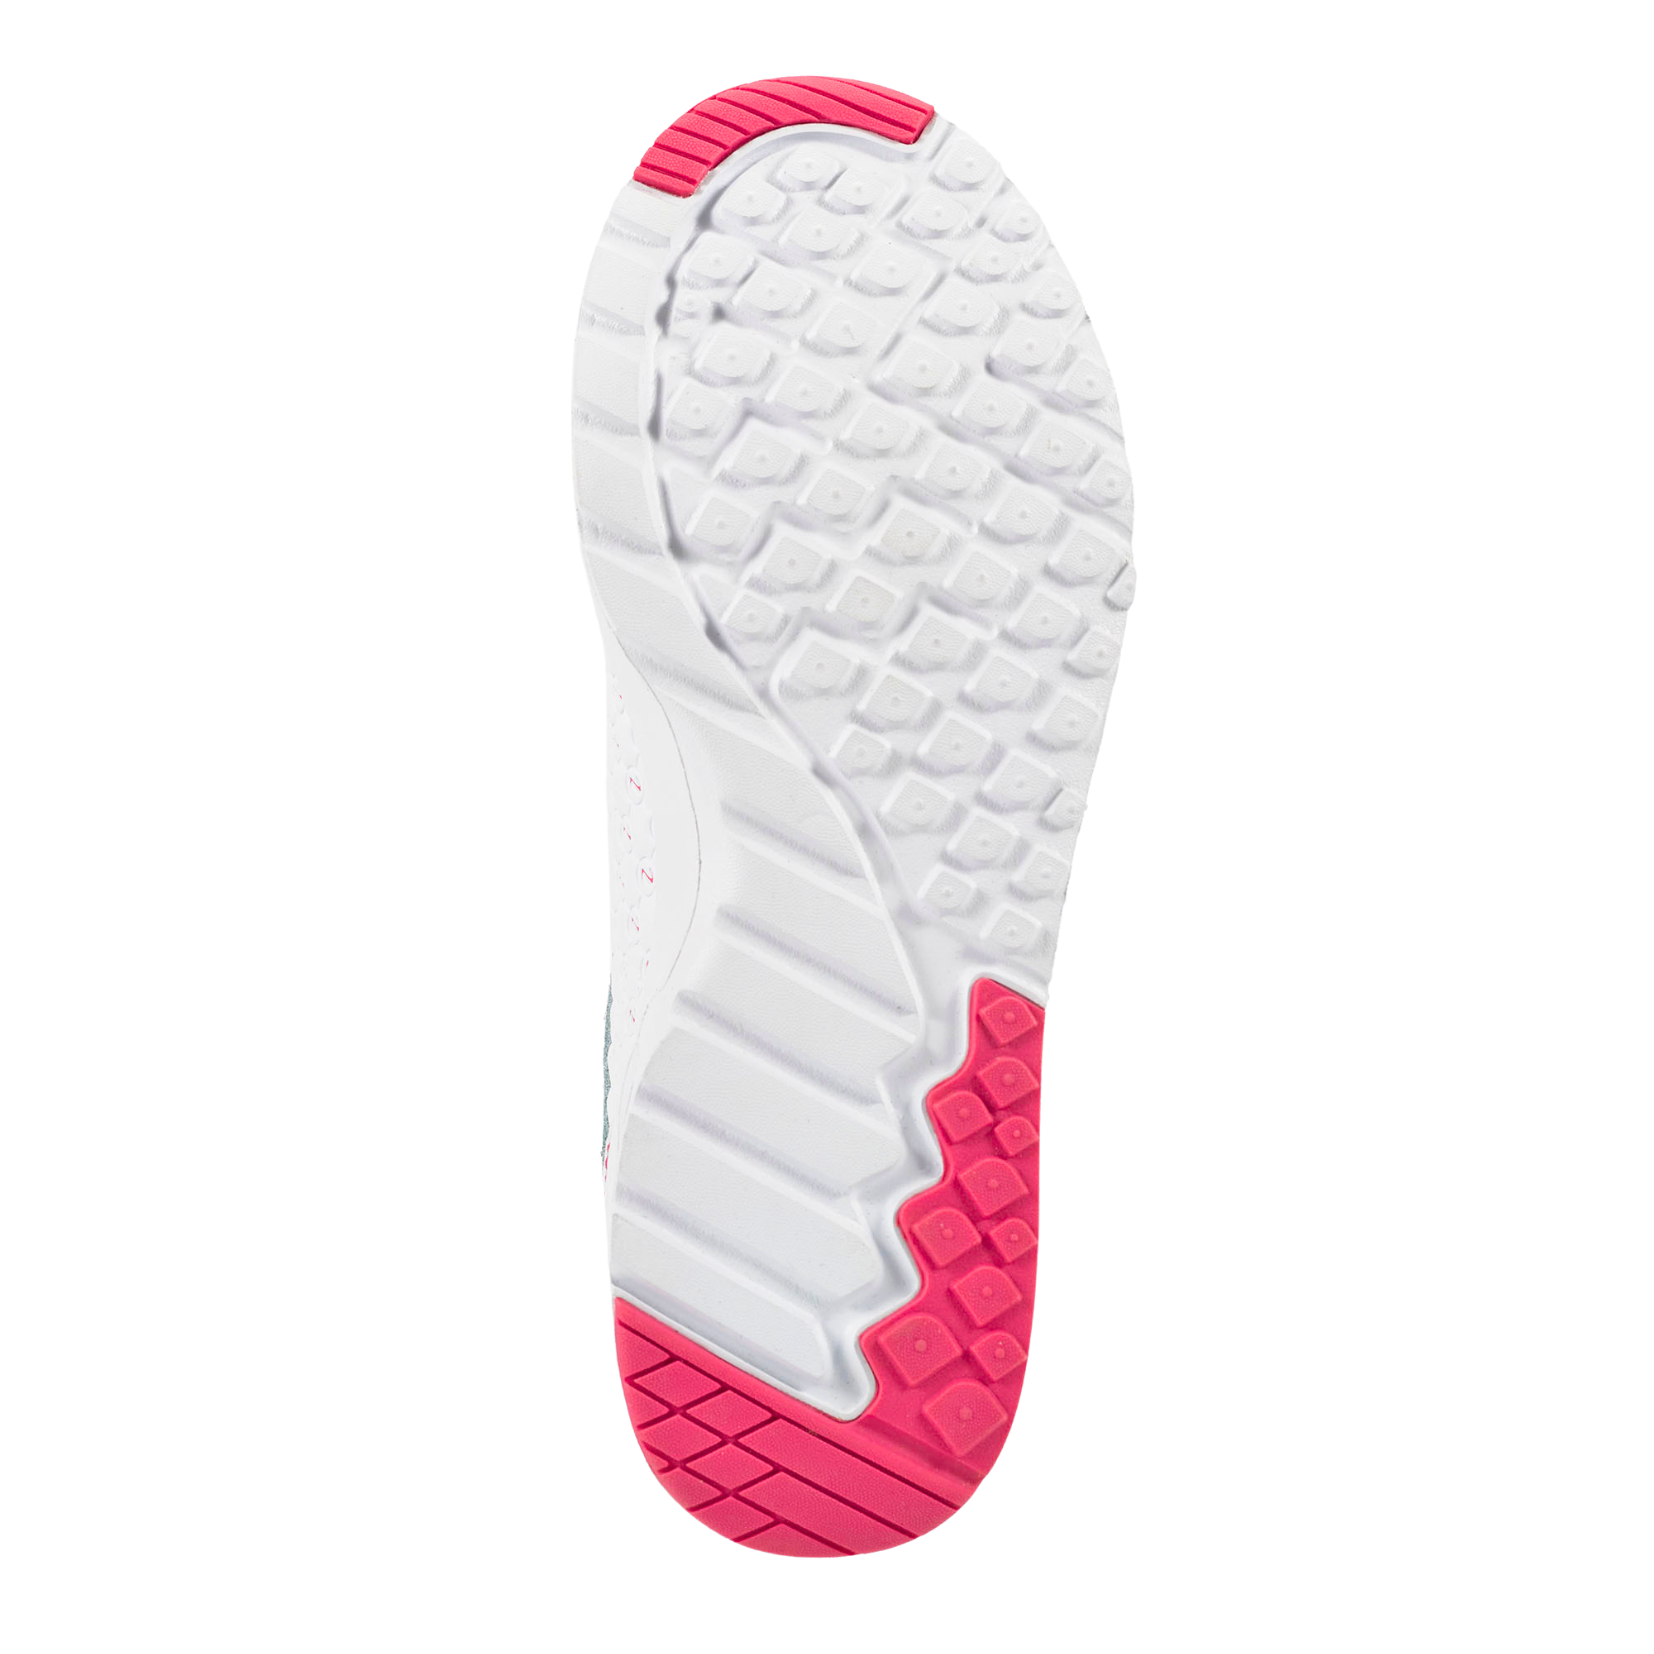 Zumba Air Boss - Pink/White (Special Order)